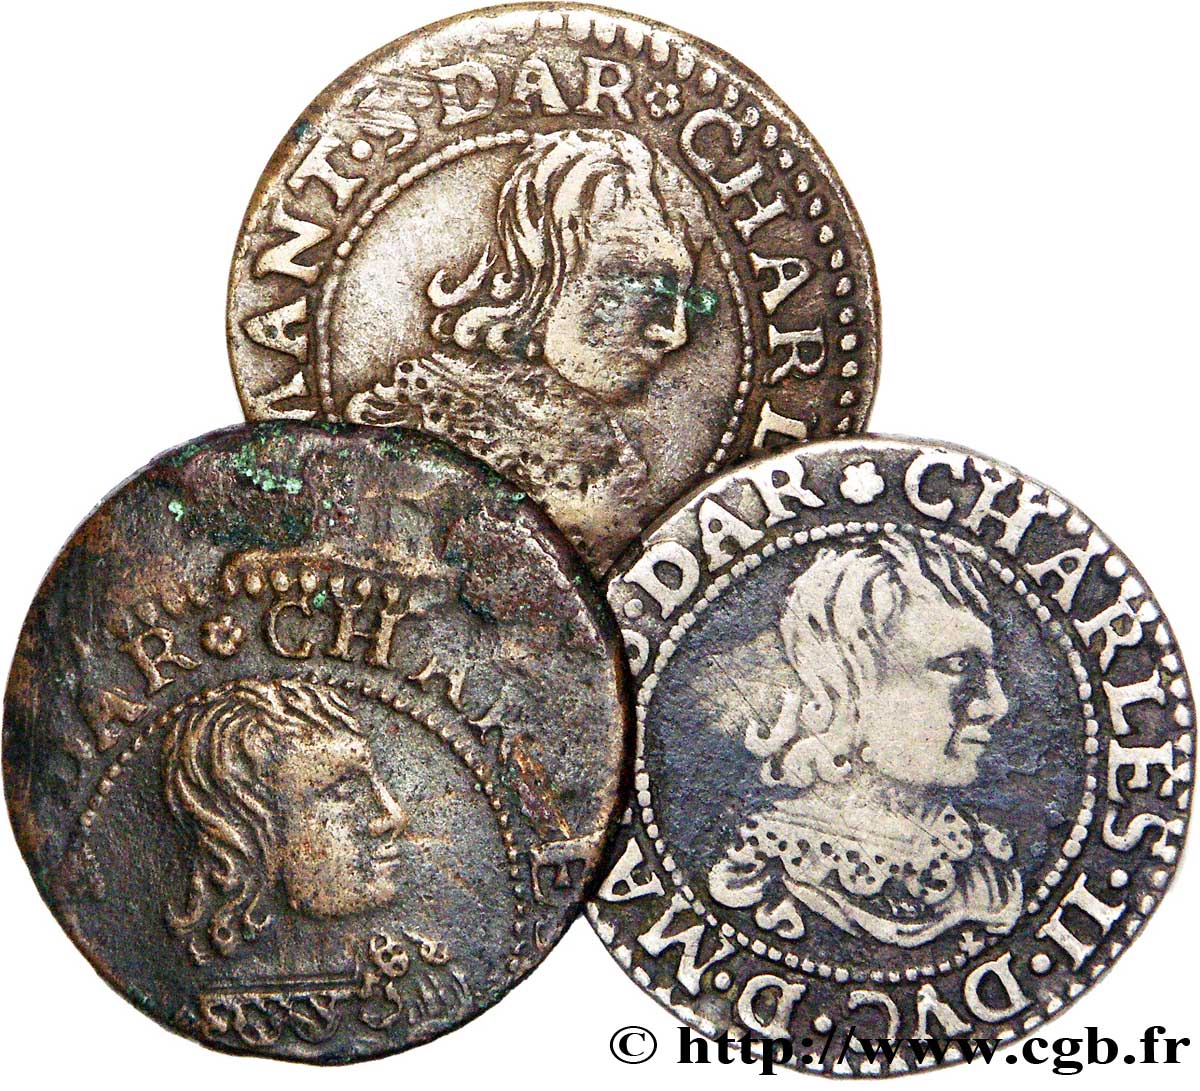 ARDENNES - PRINCIPALITY OF ARCHES-CHARLEVILLE - CHARLES II GONZAGA Lot de 3 double tournois, type 22 VF